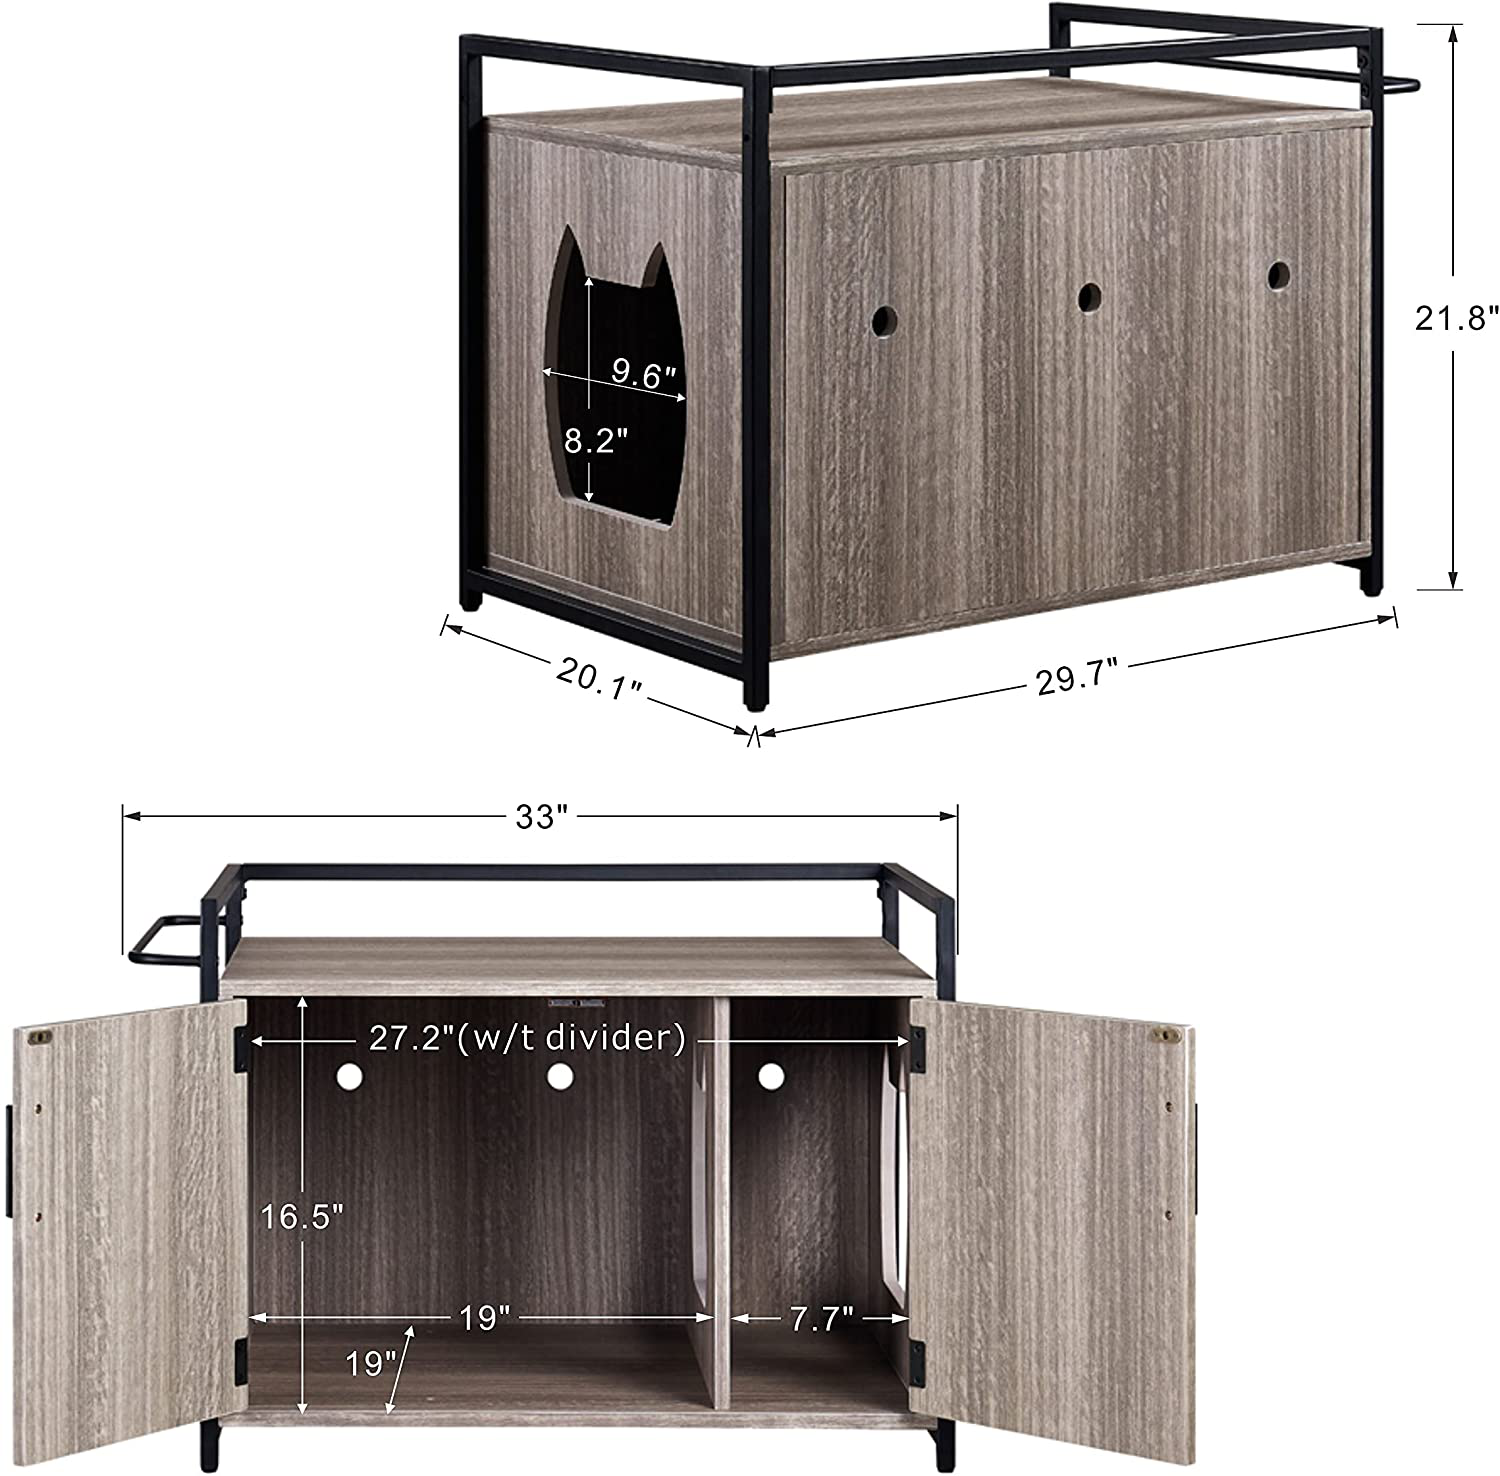 Unipaws Cat Litter Box Enclosure with Metal Frame, Privacy Cat Washroom Bench, Litter Box Hidden, Pet Crate with Iron and Wood Sturdy Structure, Cat House Nightstand